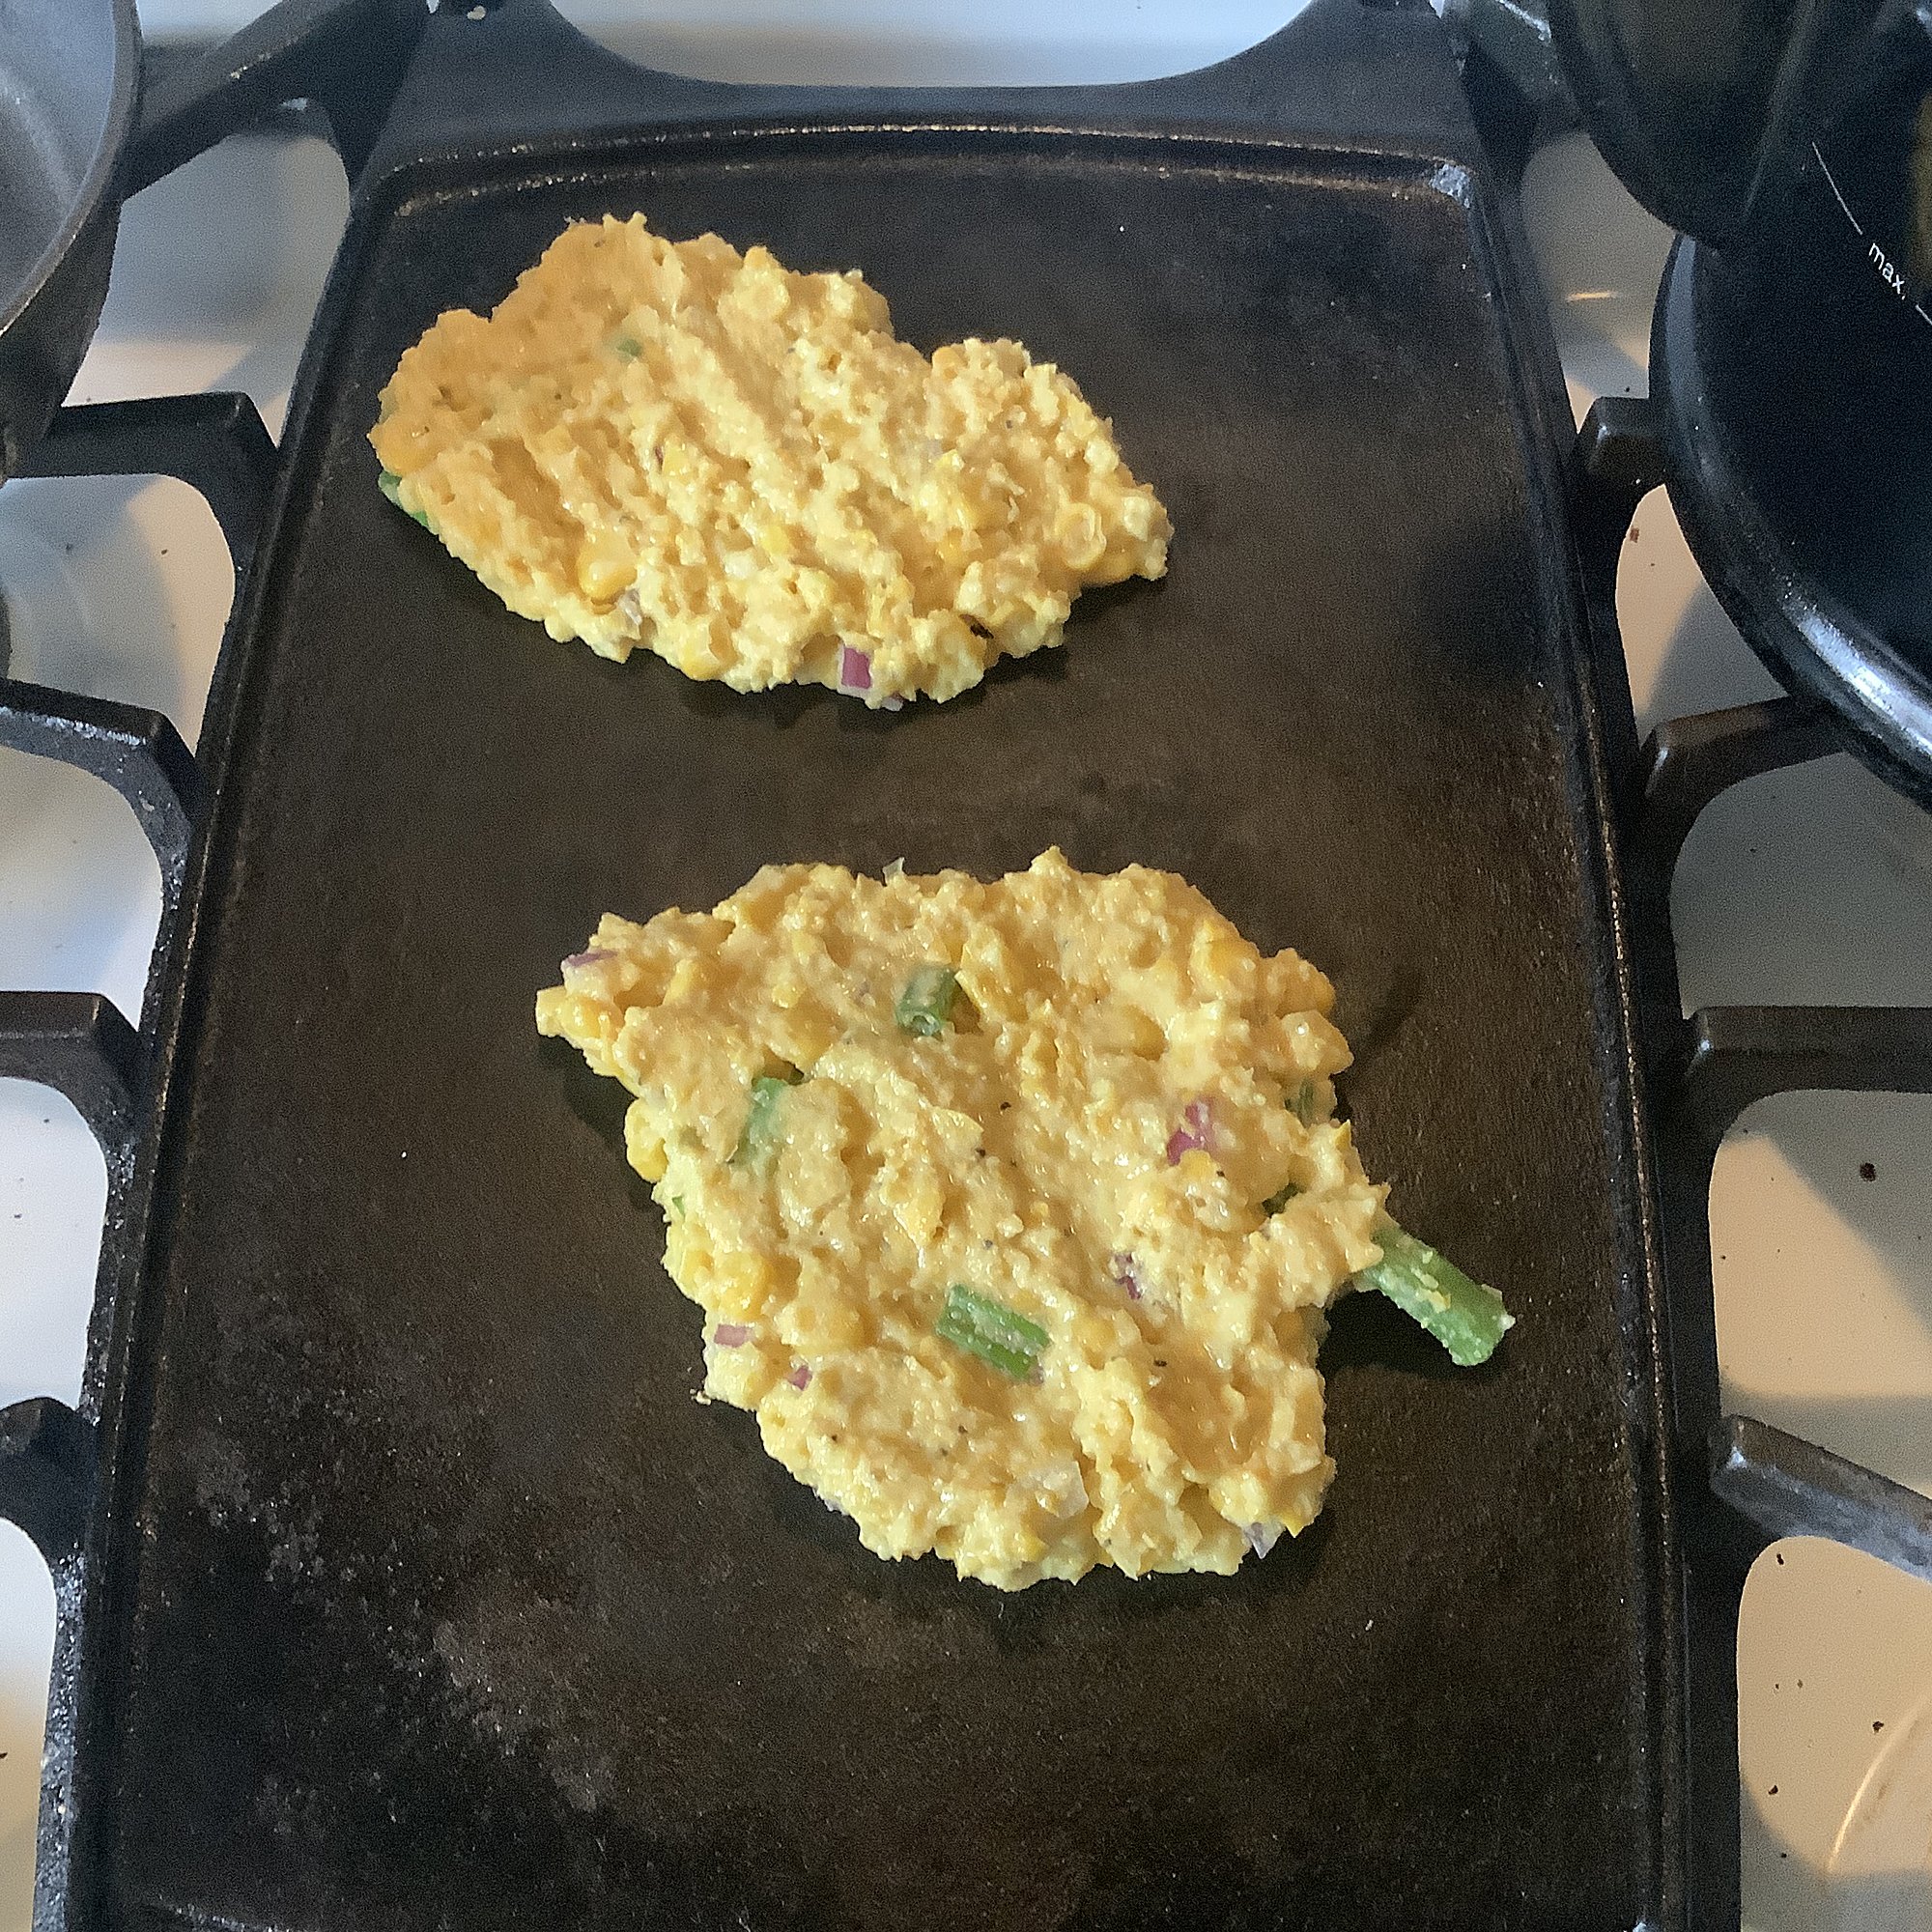 Drop onto griddle, cook for 1-3 minutes ...